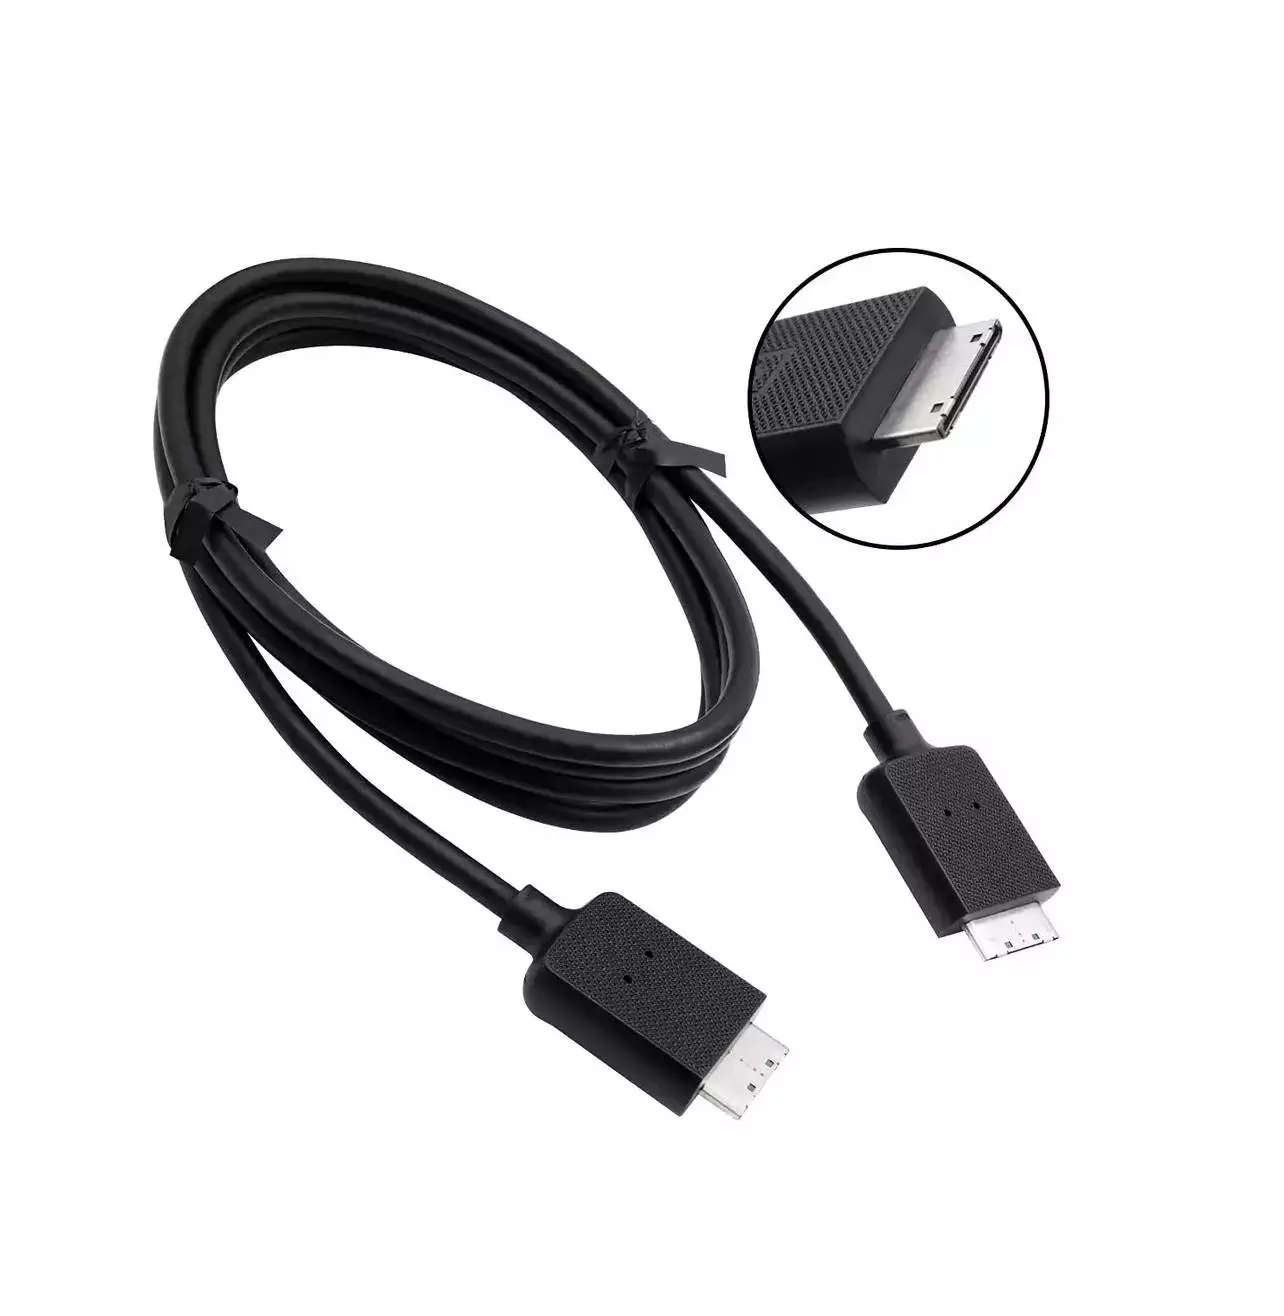 15 m High Speed HDMI Cable with Ethernet - 2L-7D15H, ATEN HDMI